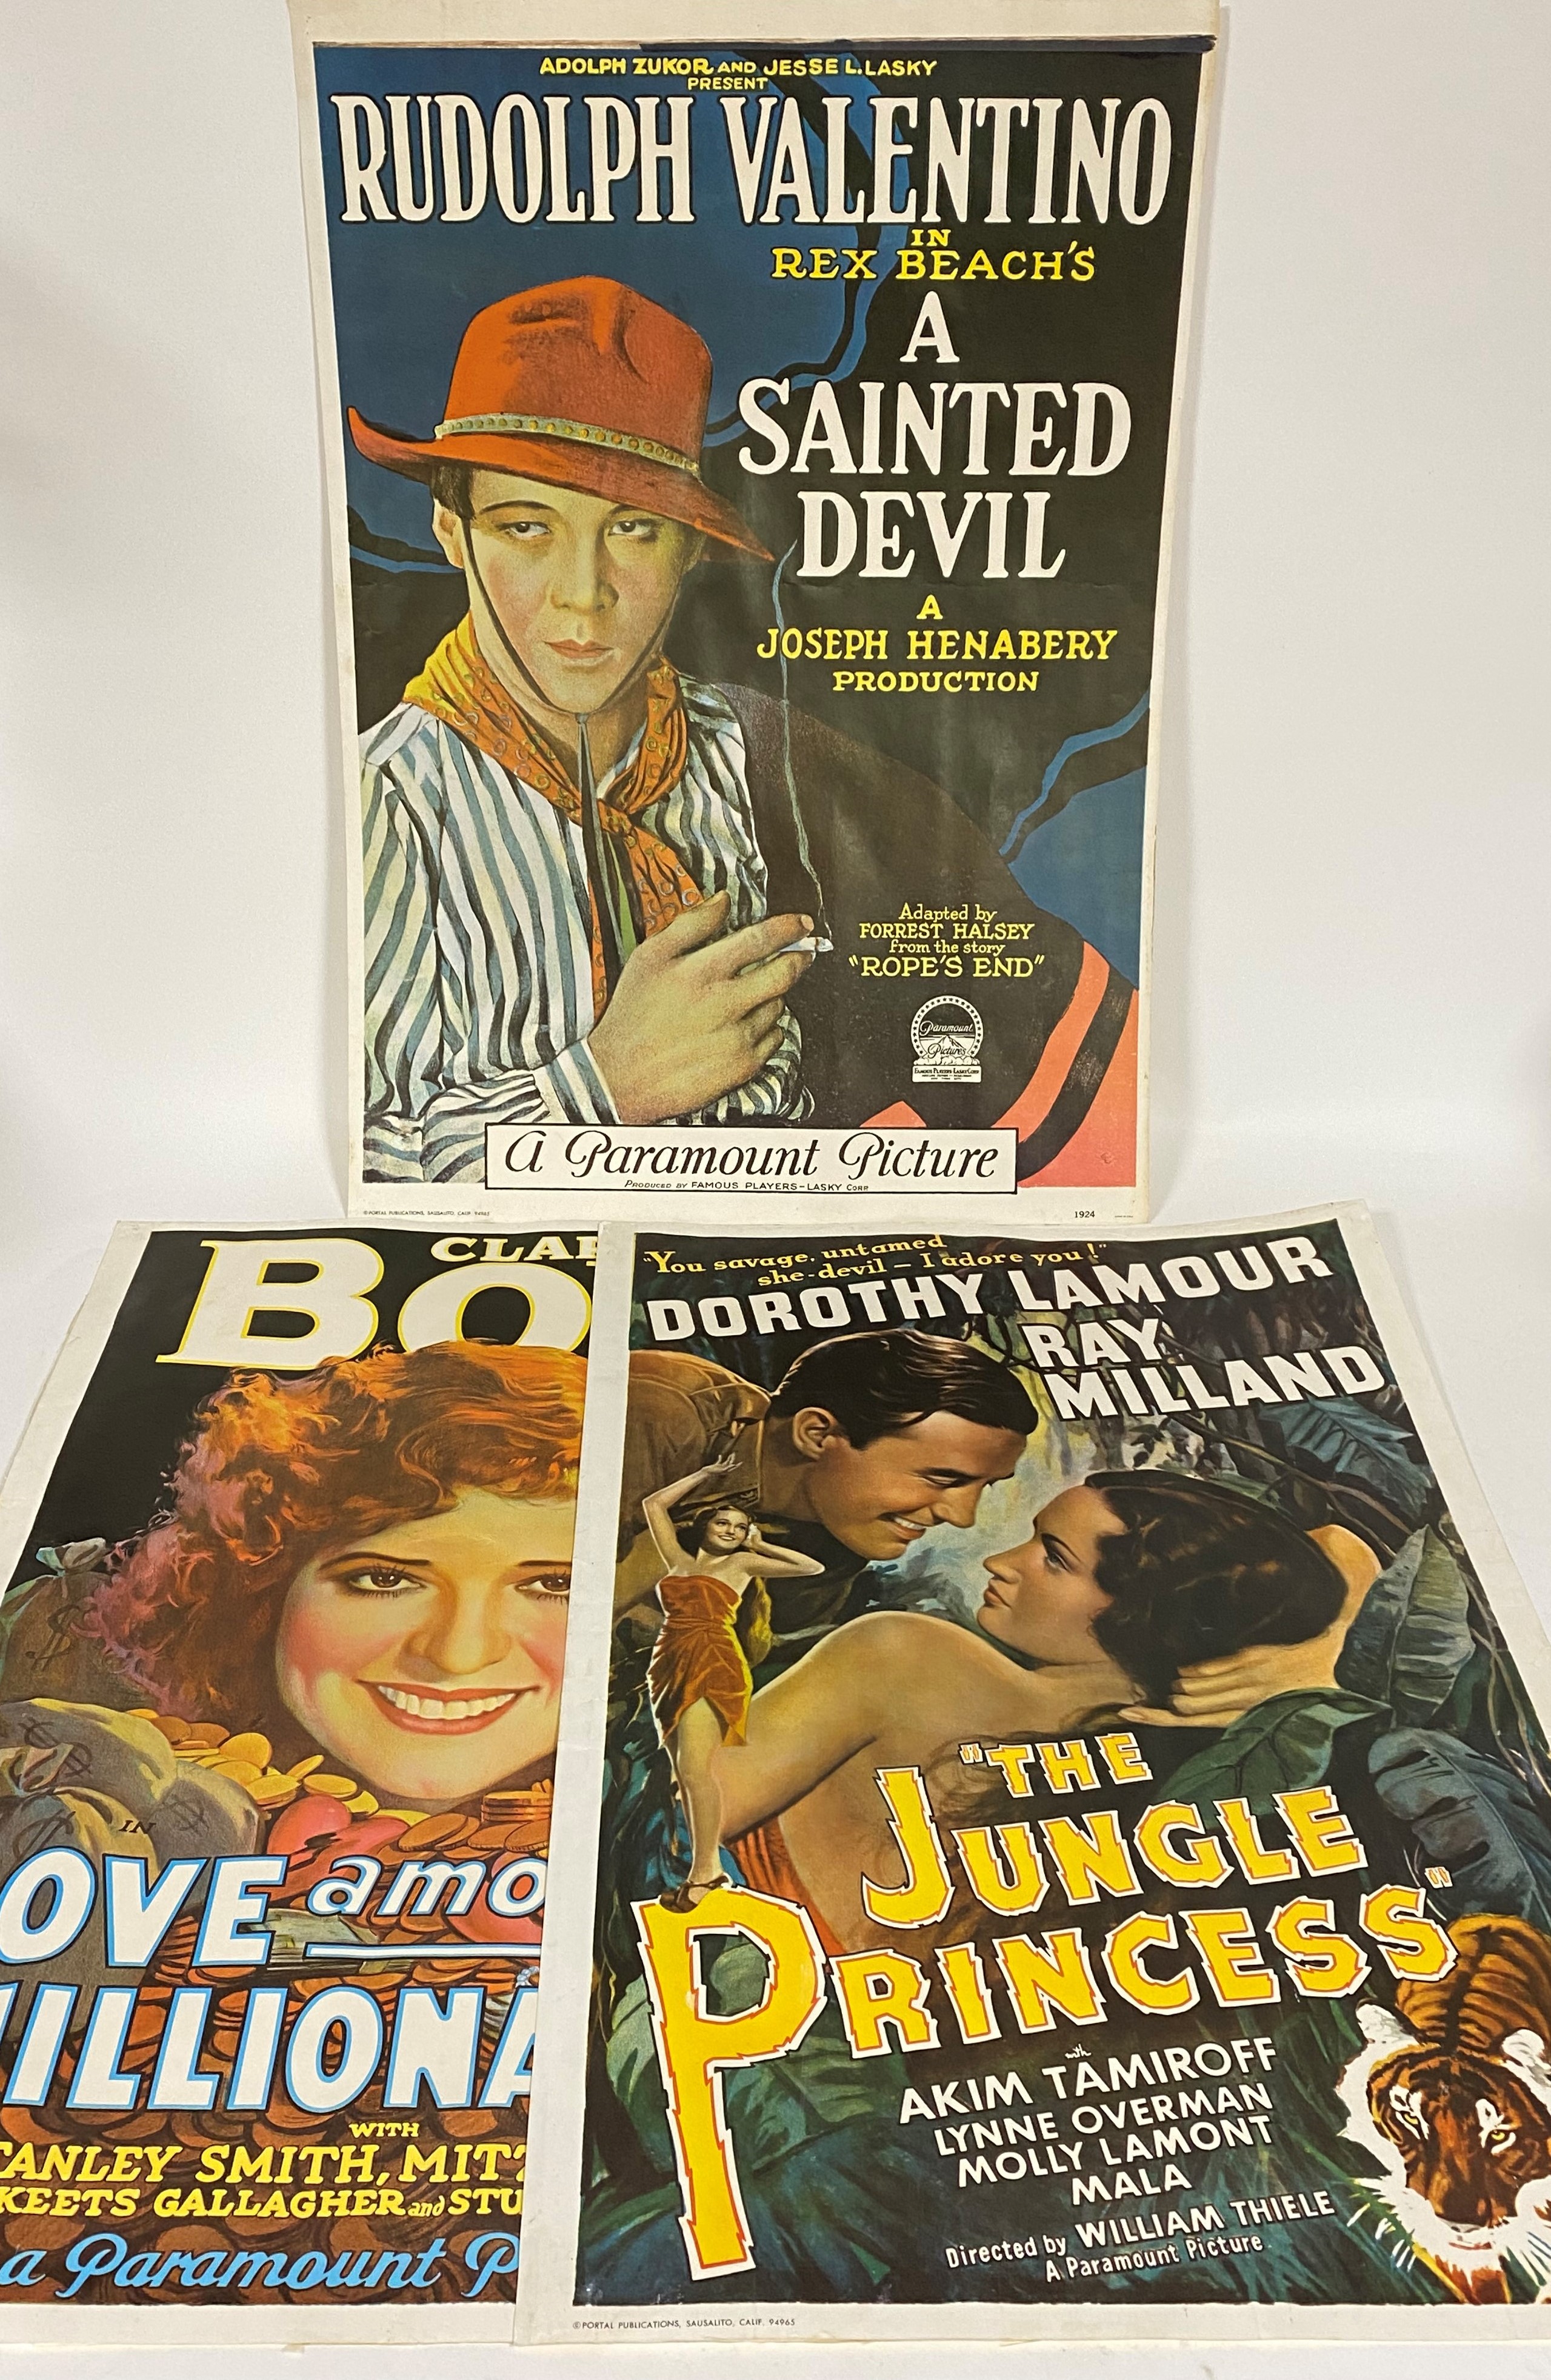 A set of three vintage 1960's Hollywood film posters by portal publications, unframed; Clara Bow